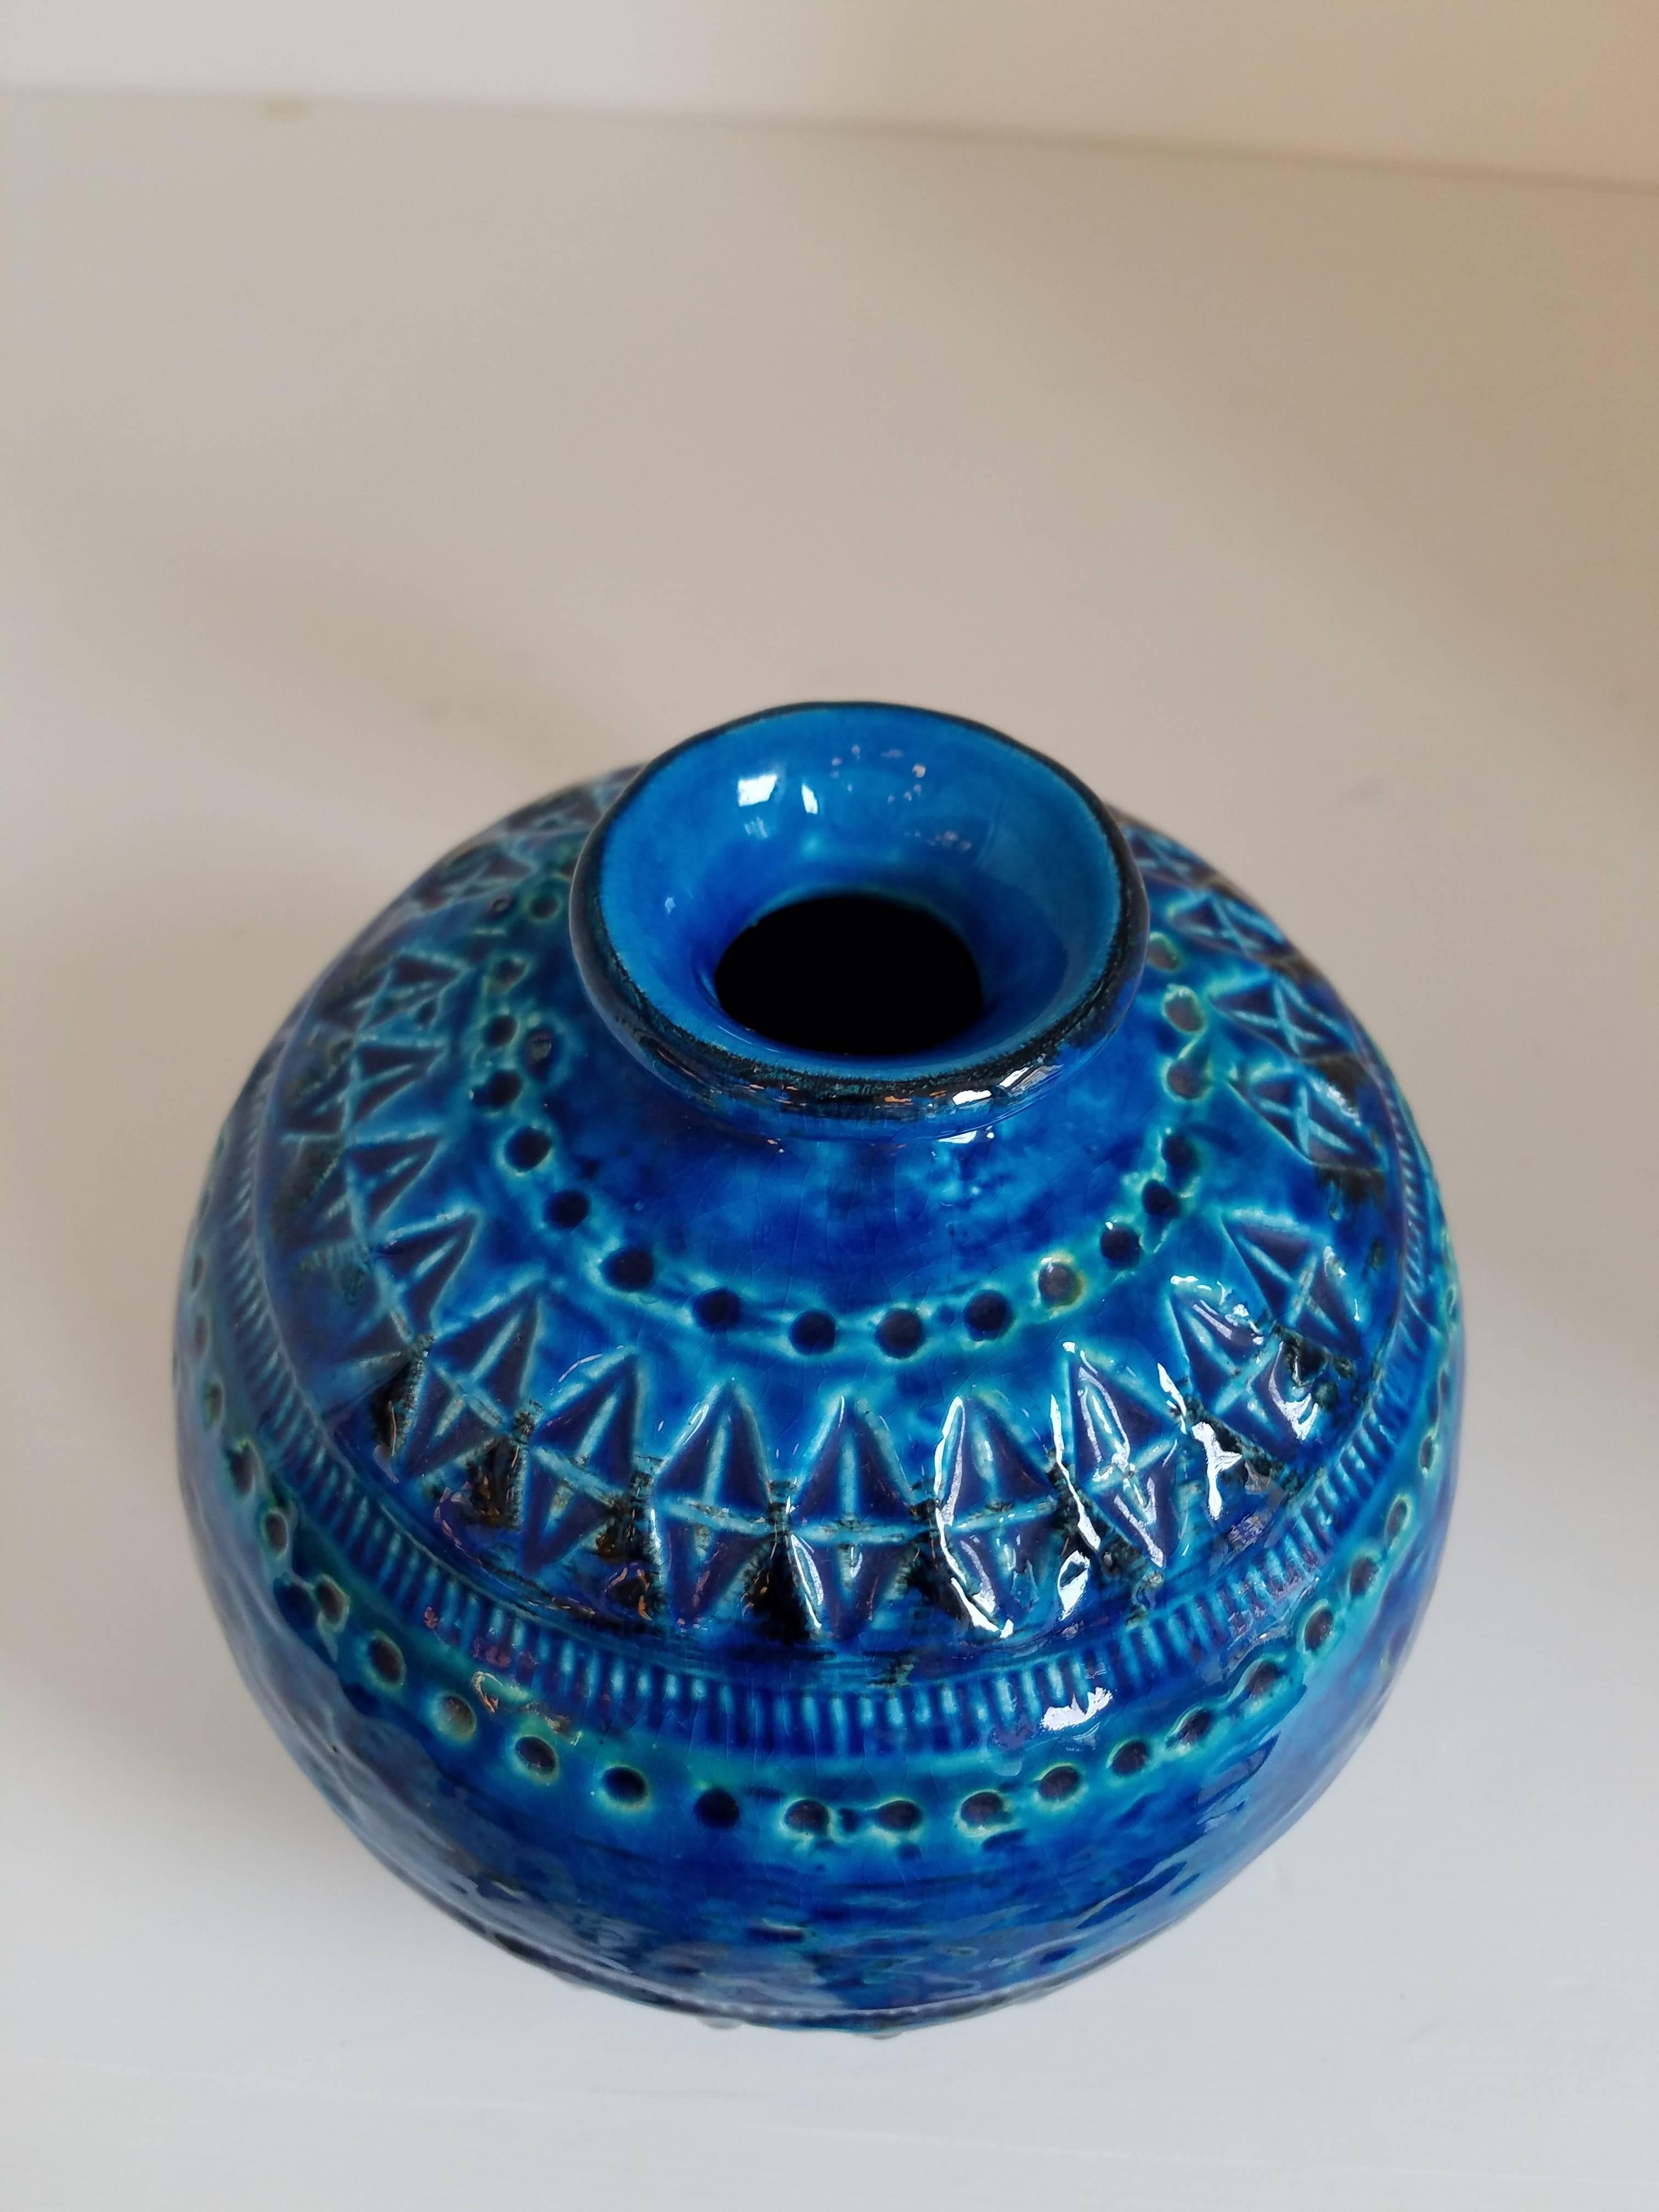 Rimini blue, blue glazed ceramic spherical vase by Aldo Londi for Bitossi with hand-carved geometric designs and a vibrant turquoise and cobalt glaze. Made in Italy, circa 1960.

Measures: Vase mouth 1